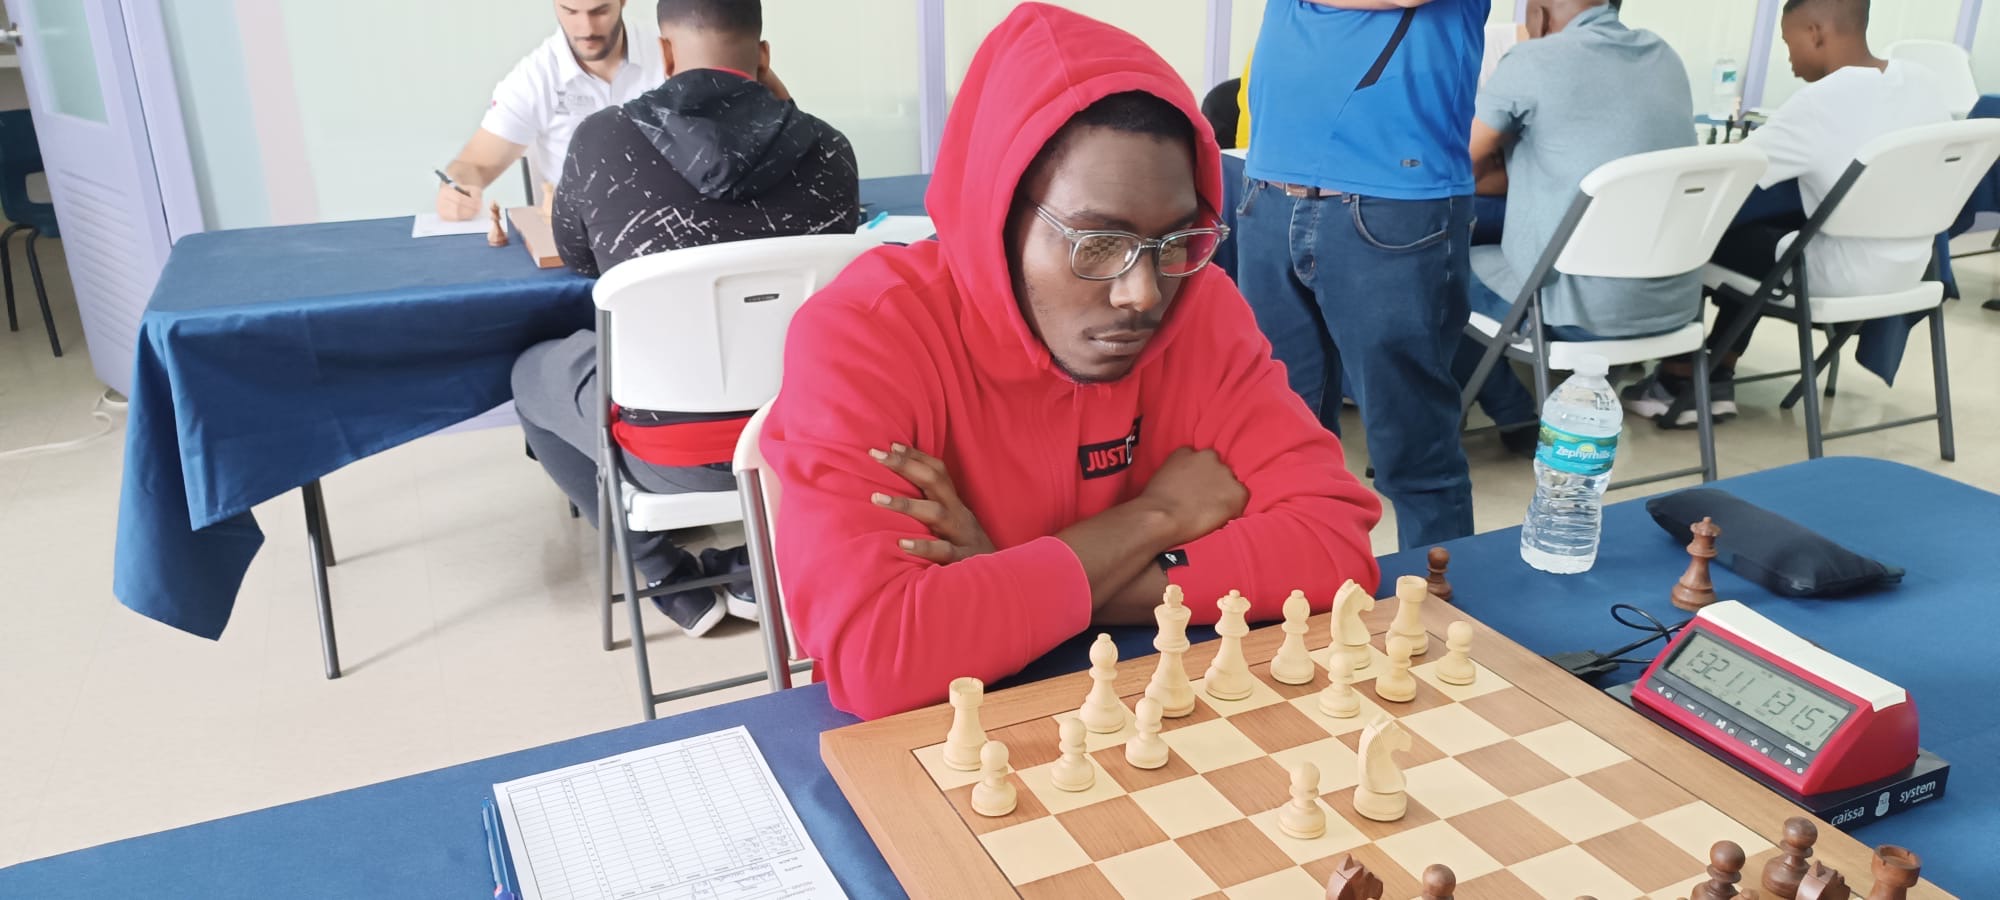 husbands-extends-unbeaten-run-in-barbados-chess-federation-heroes-day-masters